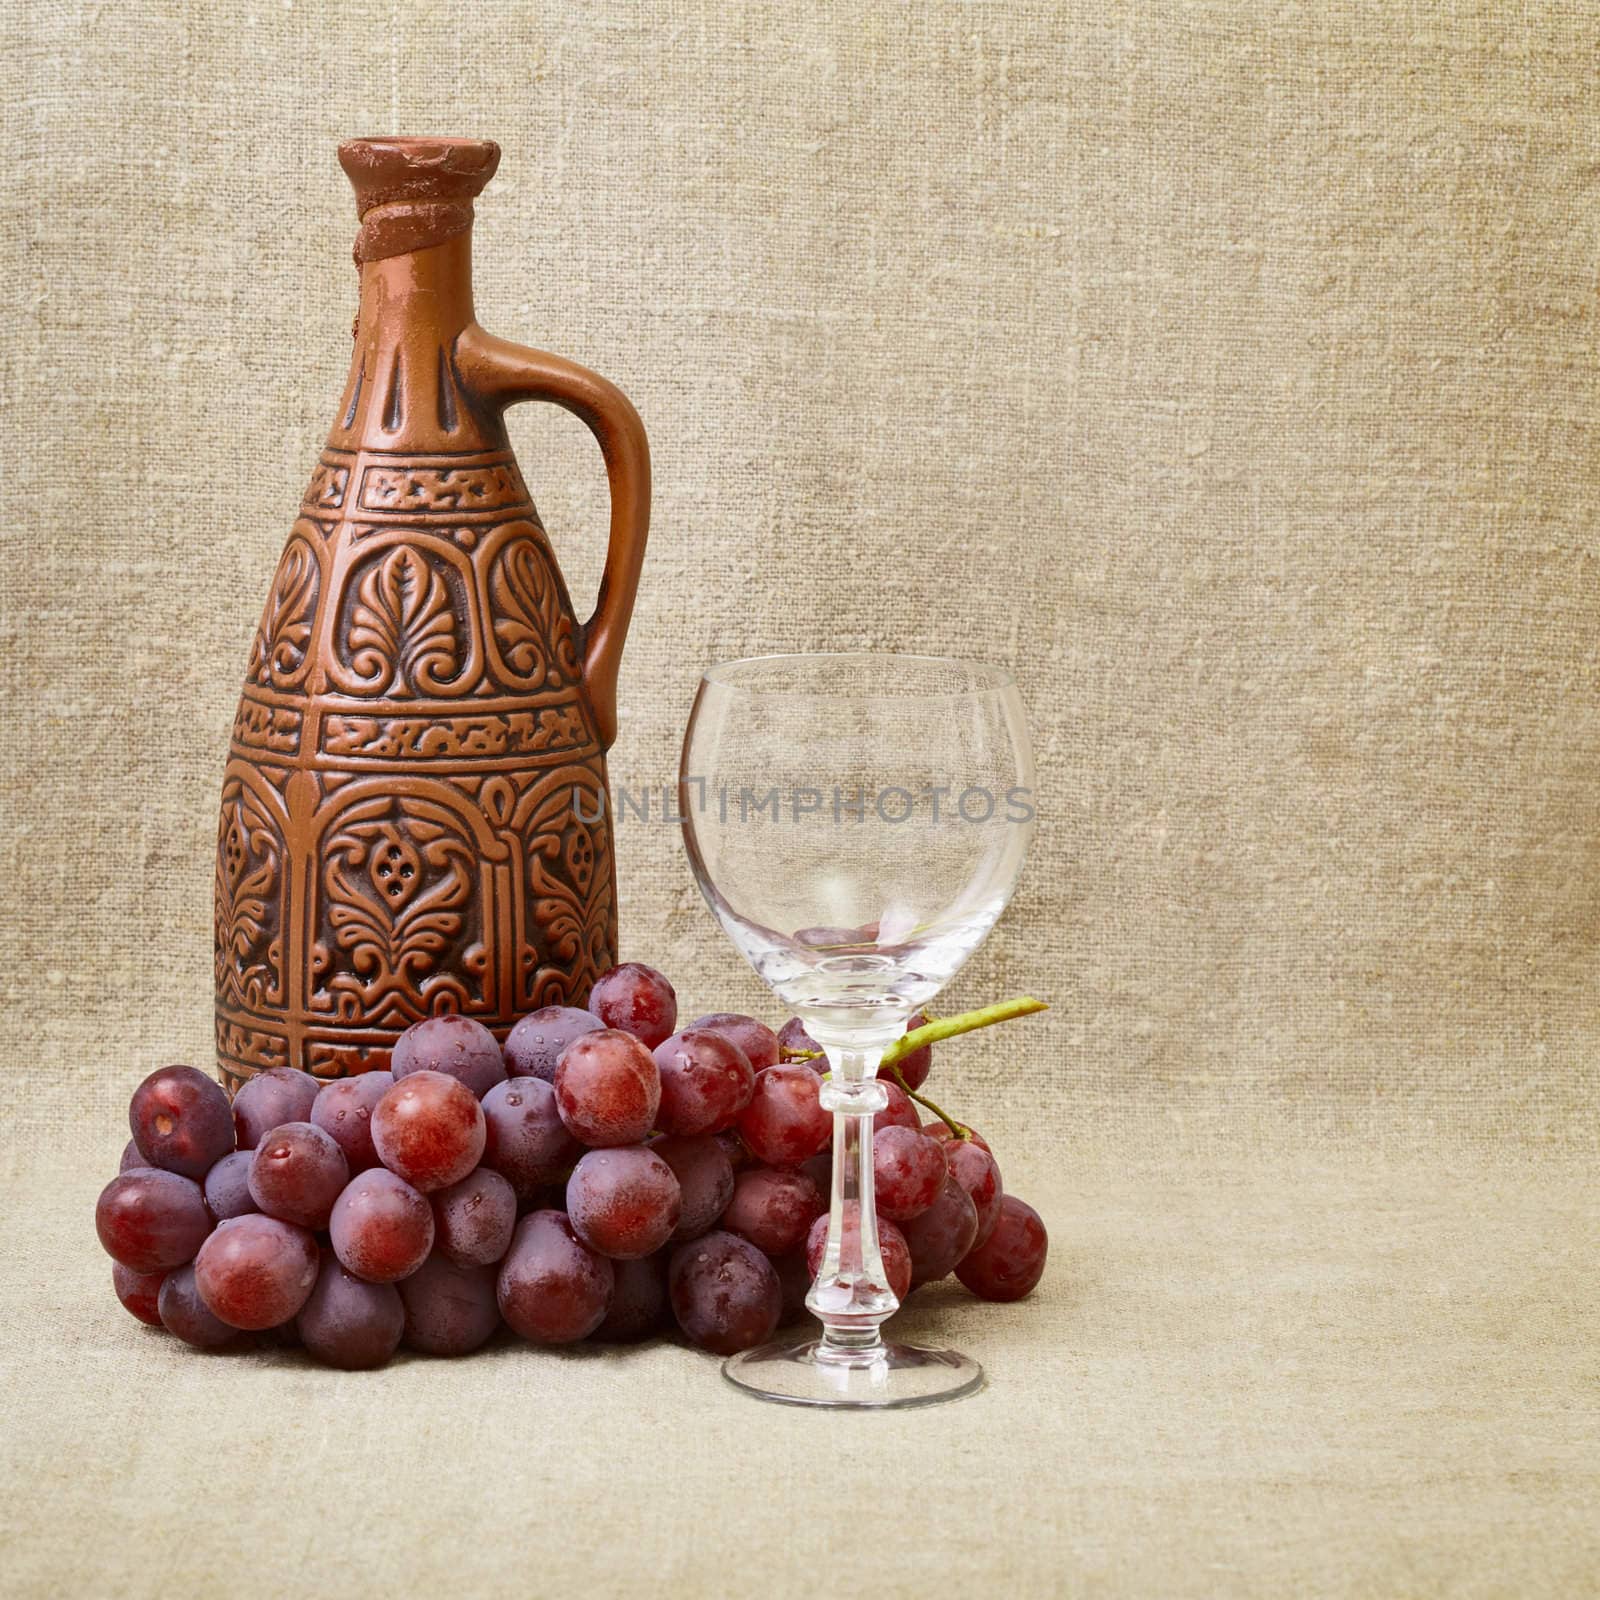 Still-life - clay bottle, grapes and a glass on canvas by pzaxe